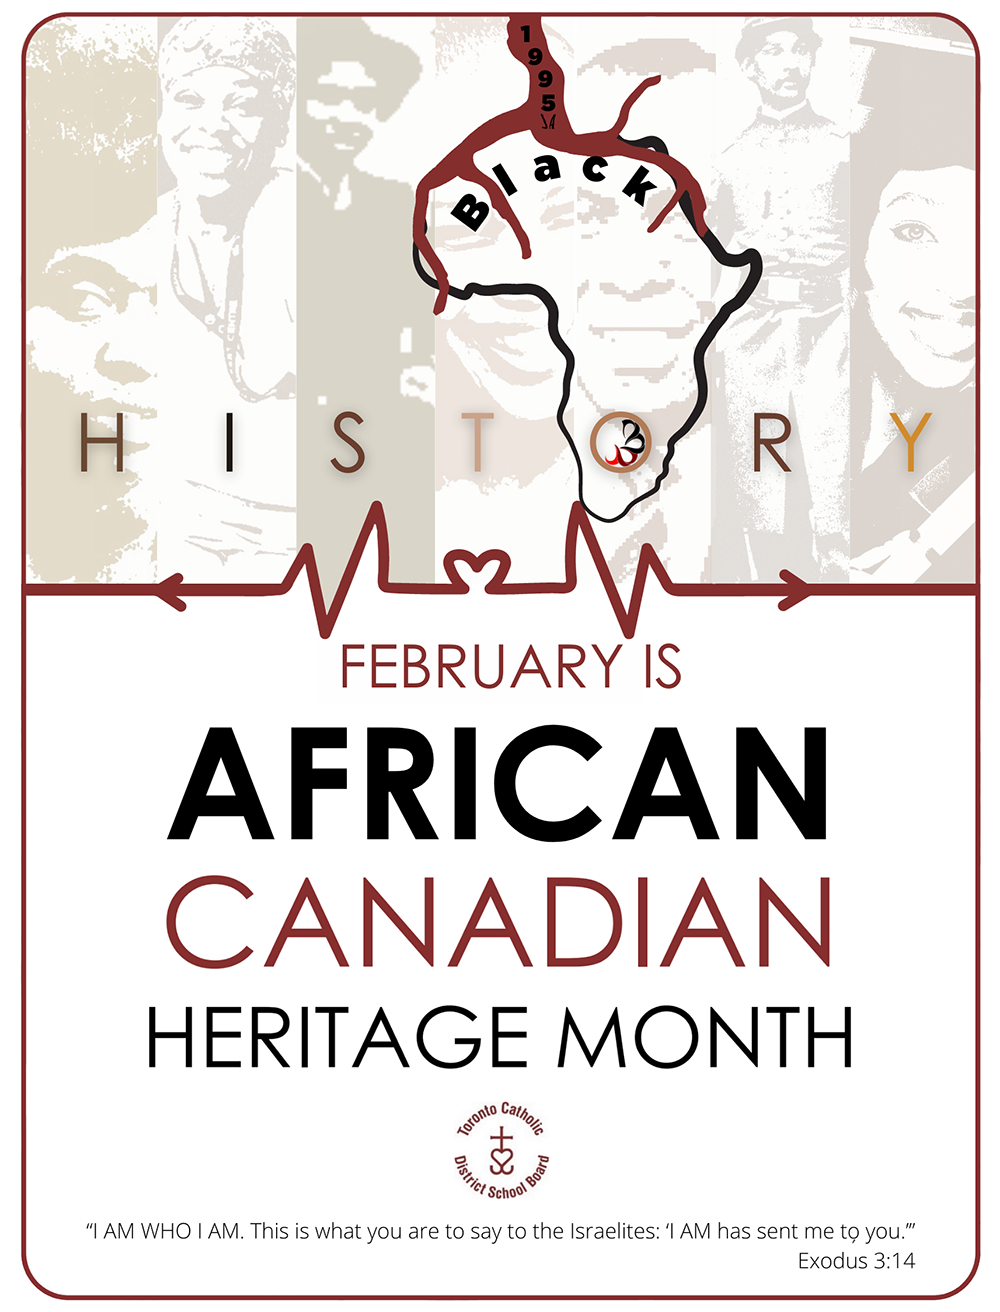 February is African Canadian Heritage Month